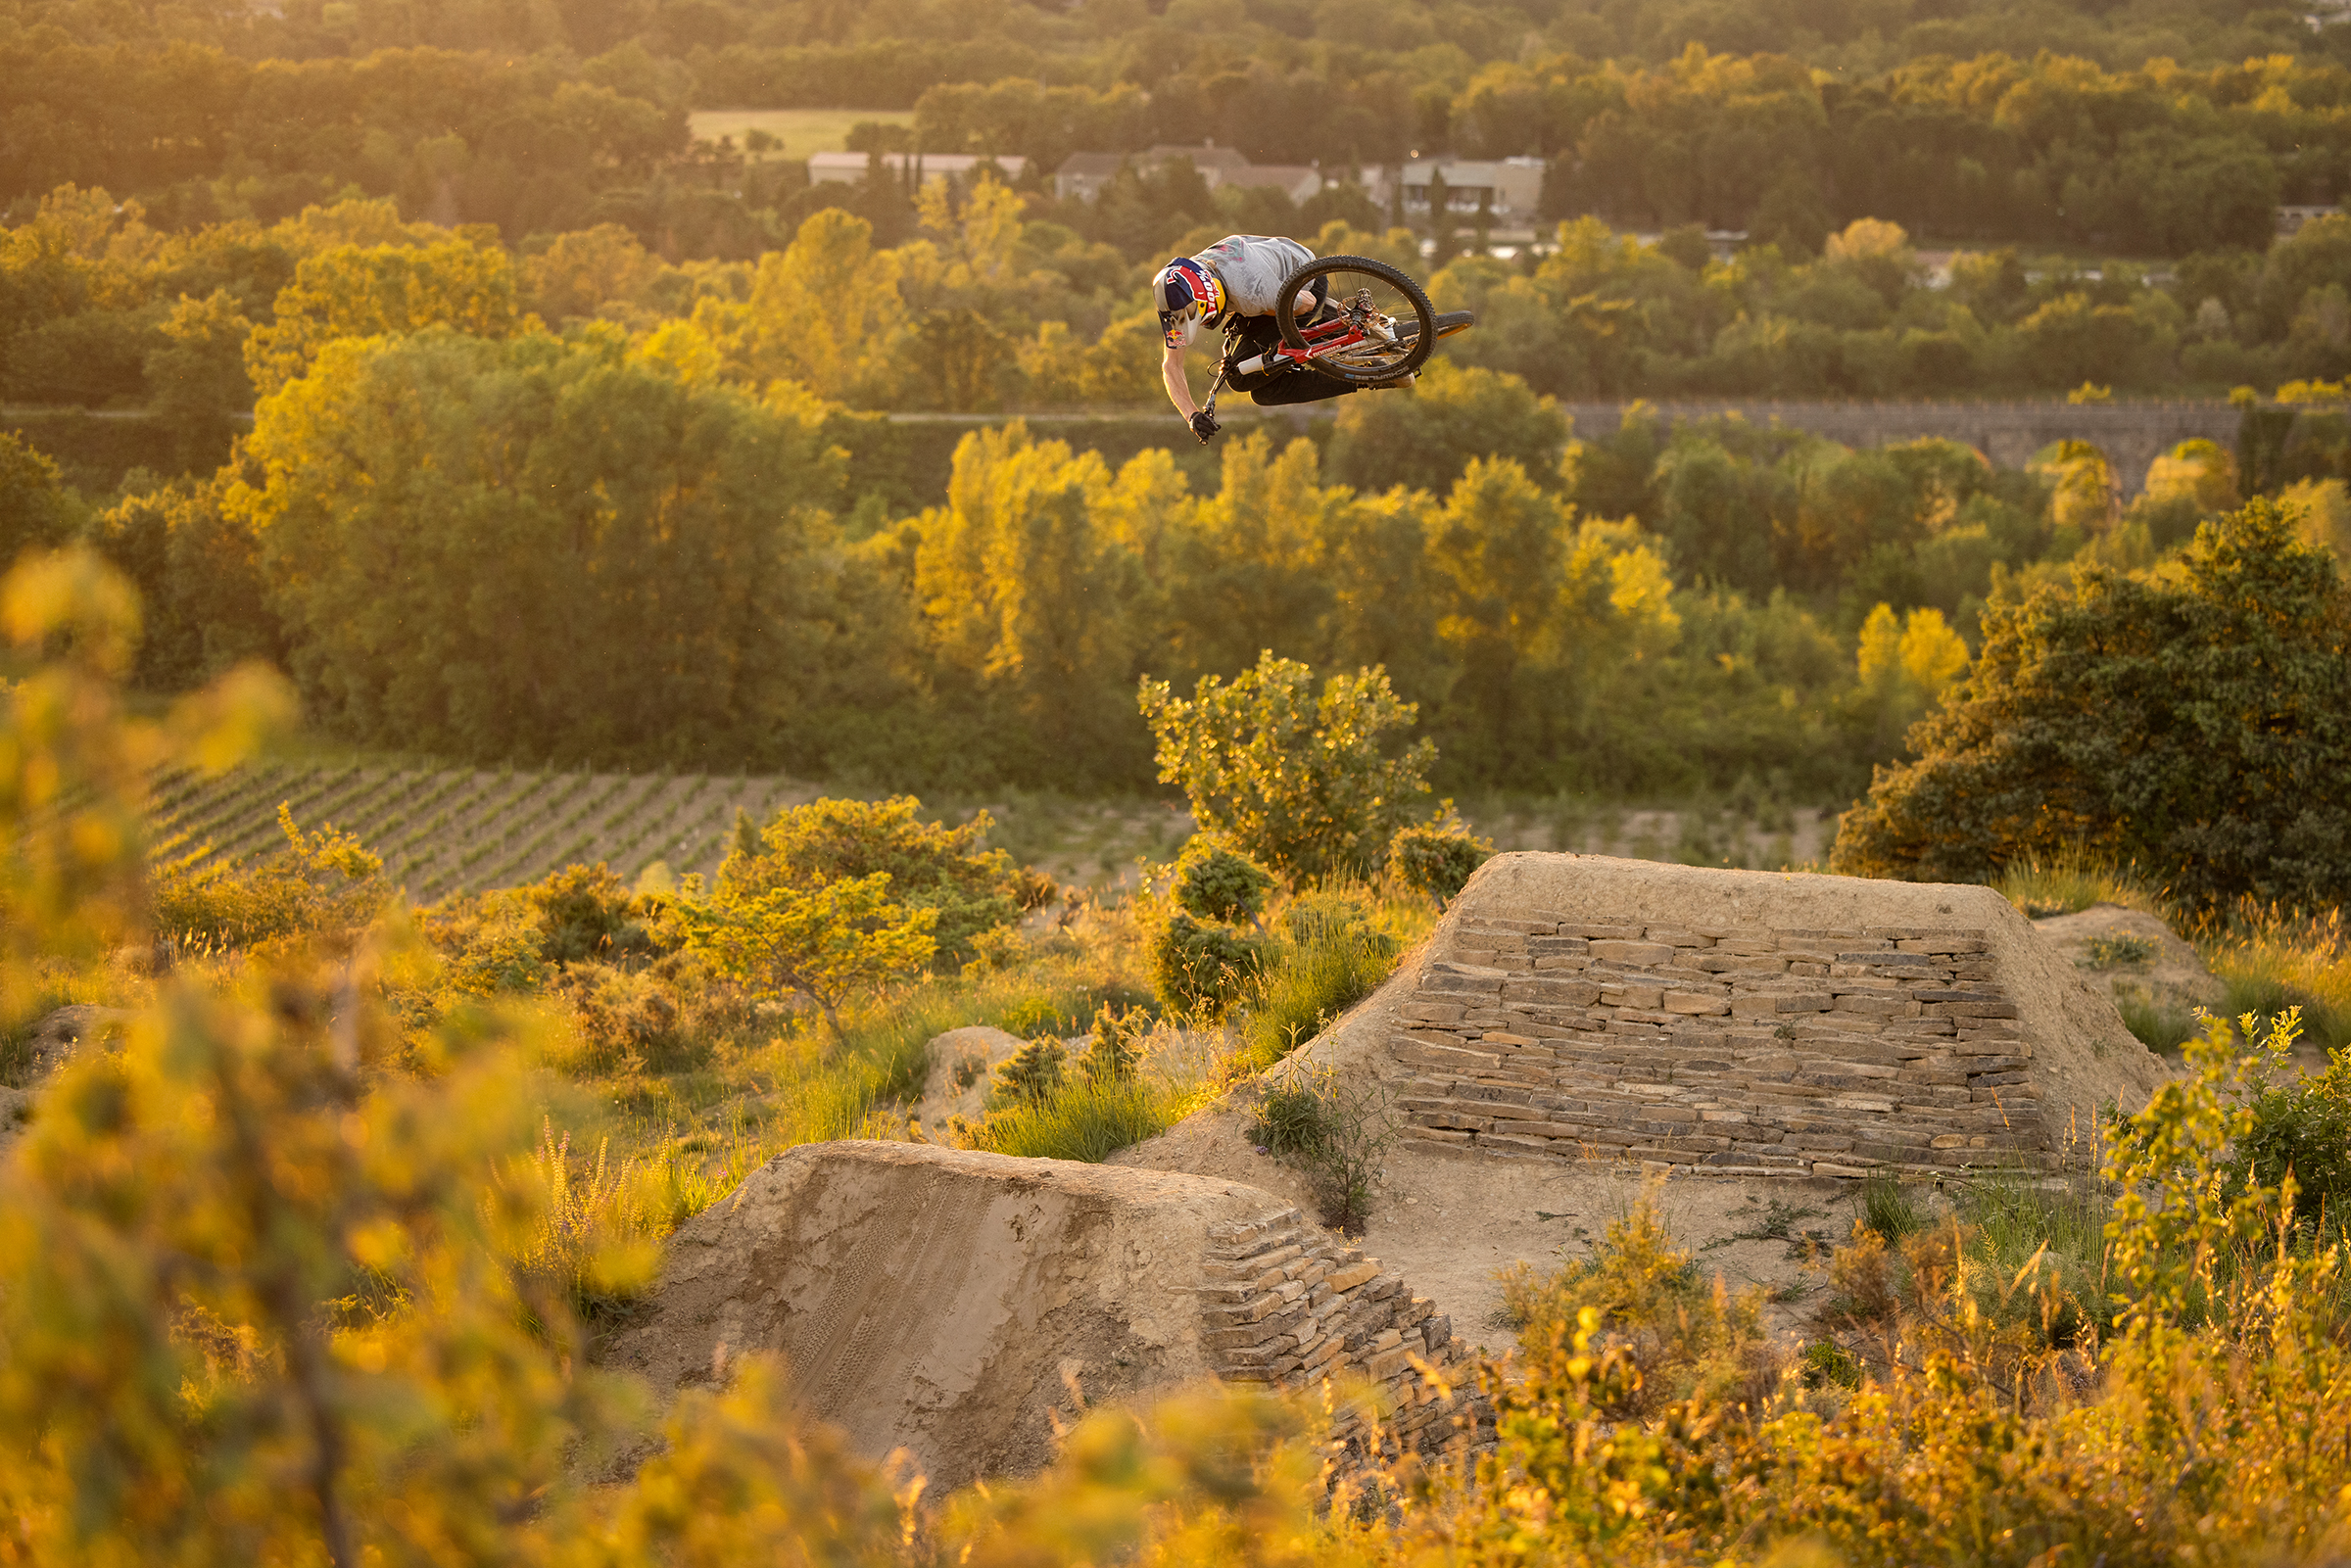 Thomas Genon doing a table top in the Art of MTB